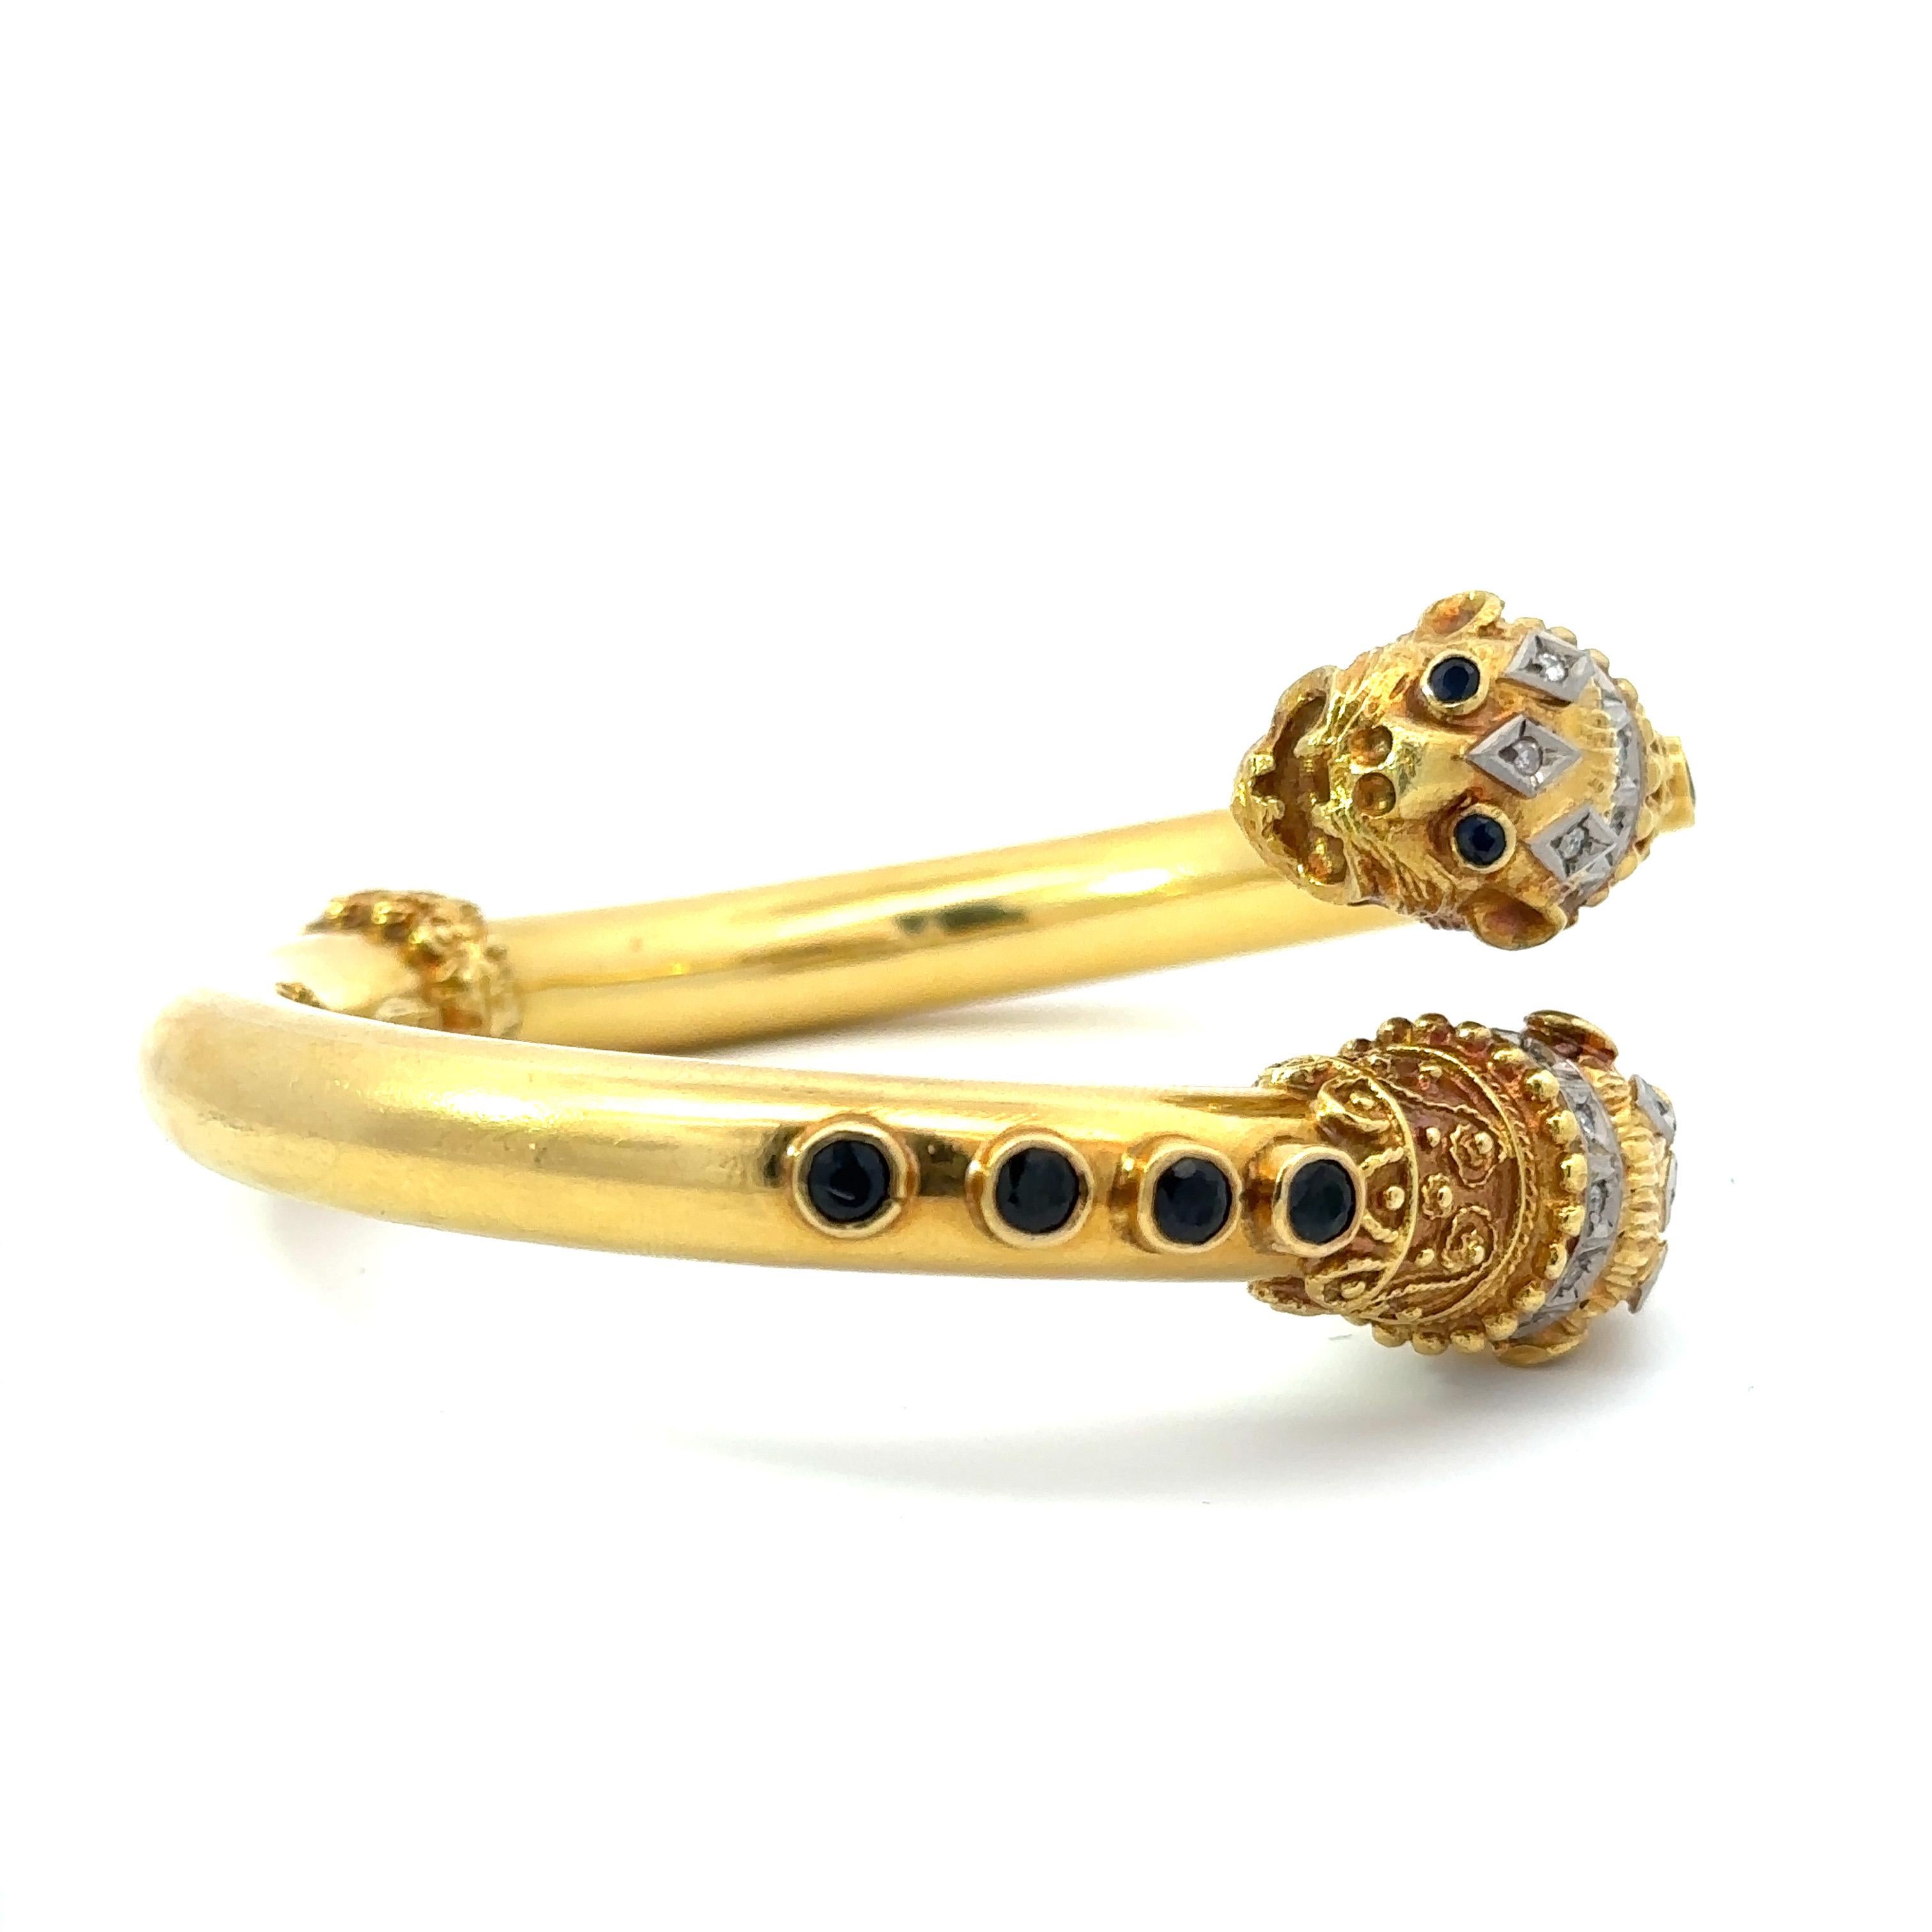 Lalaounis Two-Headed 18k Gold Bangle In Good Condition For Sale In New York, NY